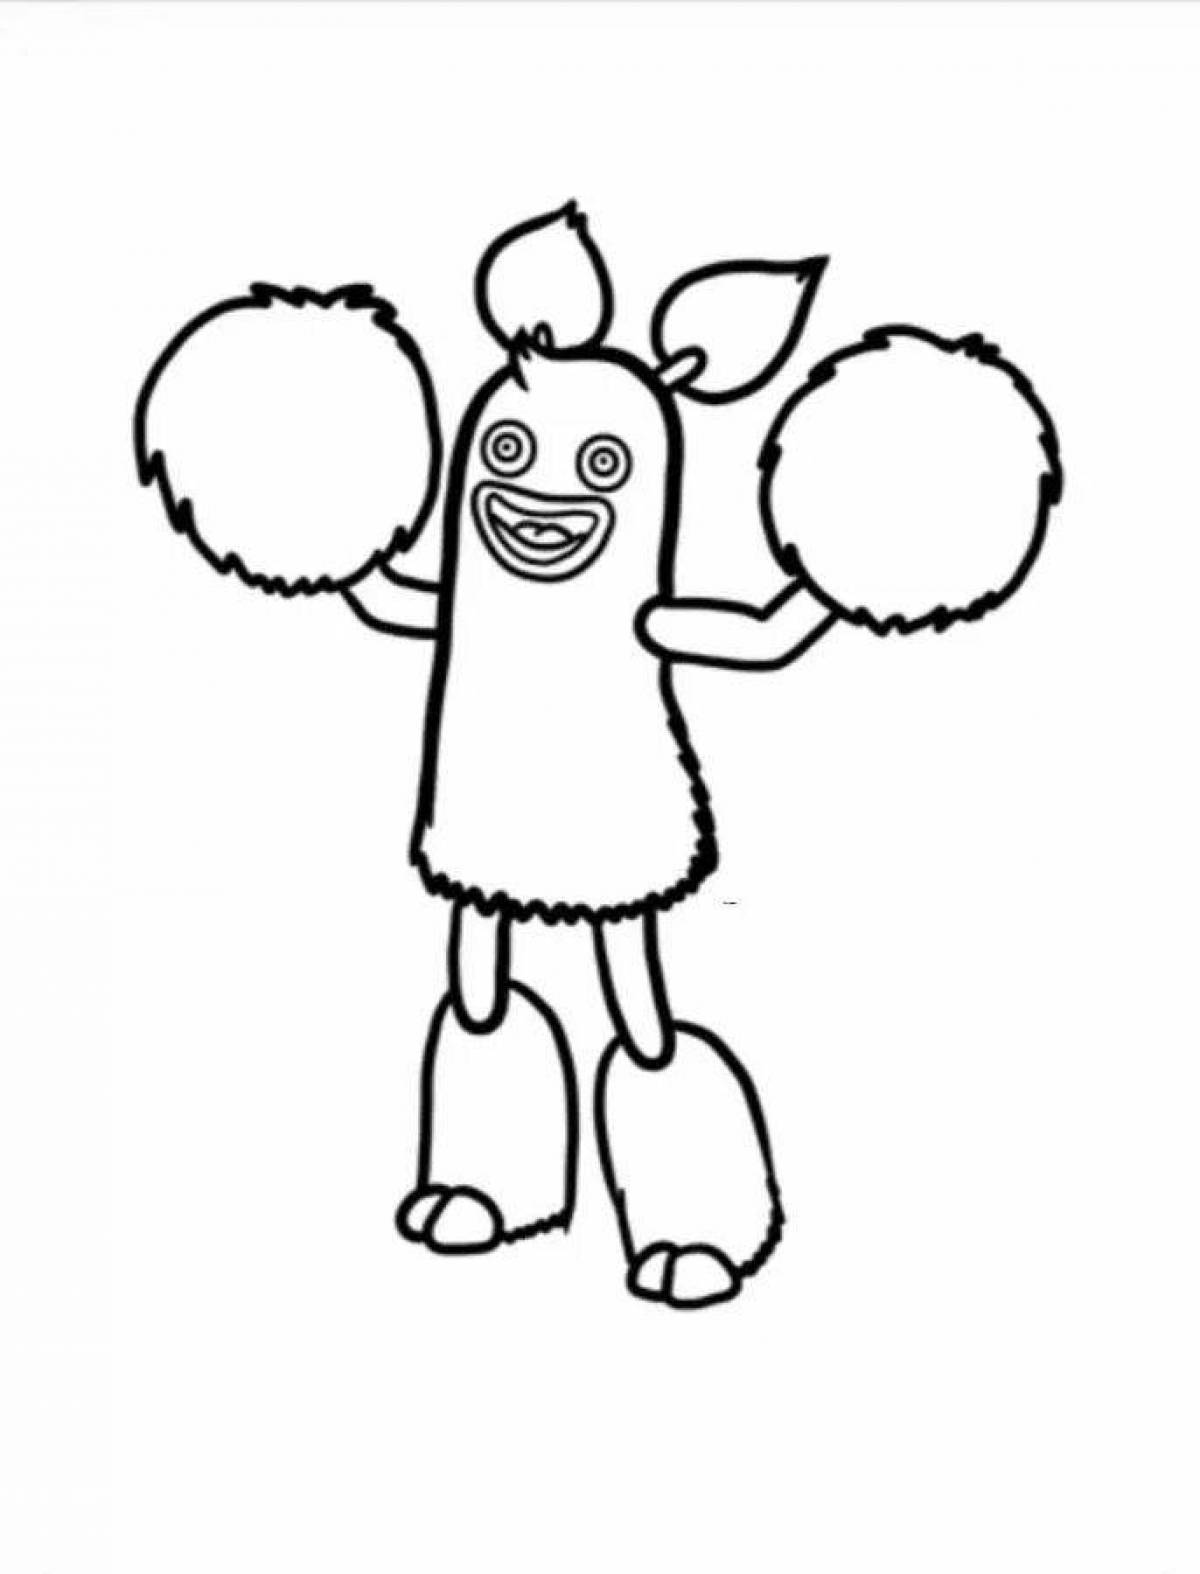 Incredible singing monster coloring pages for kids